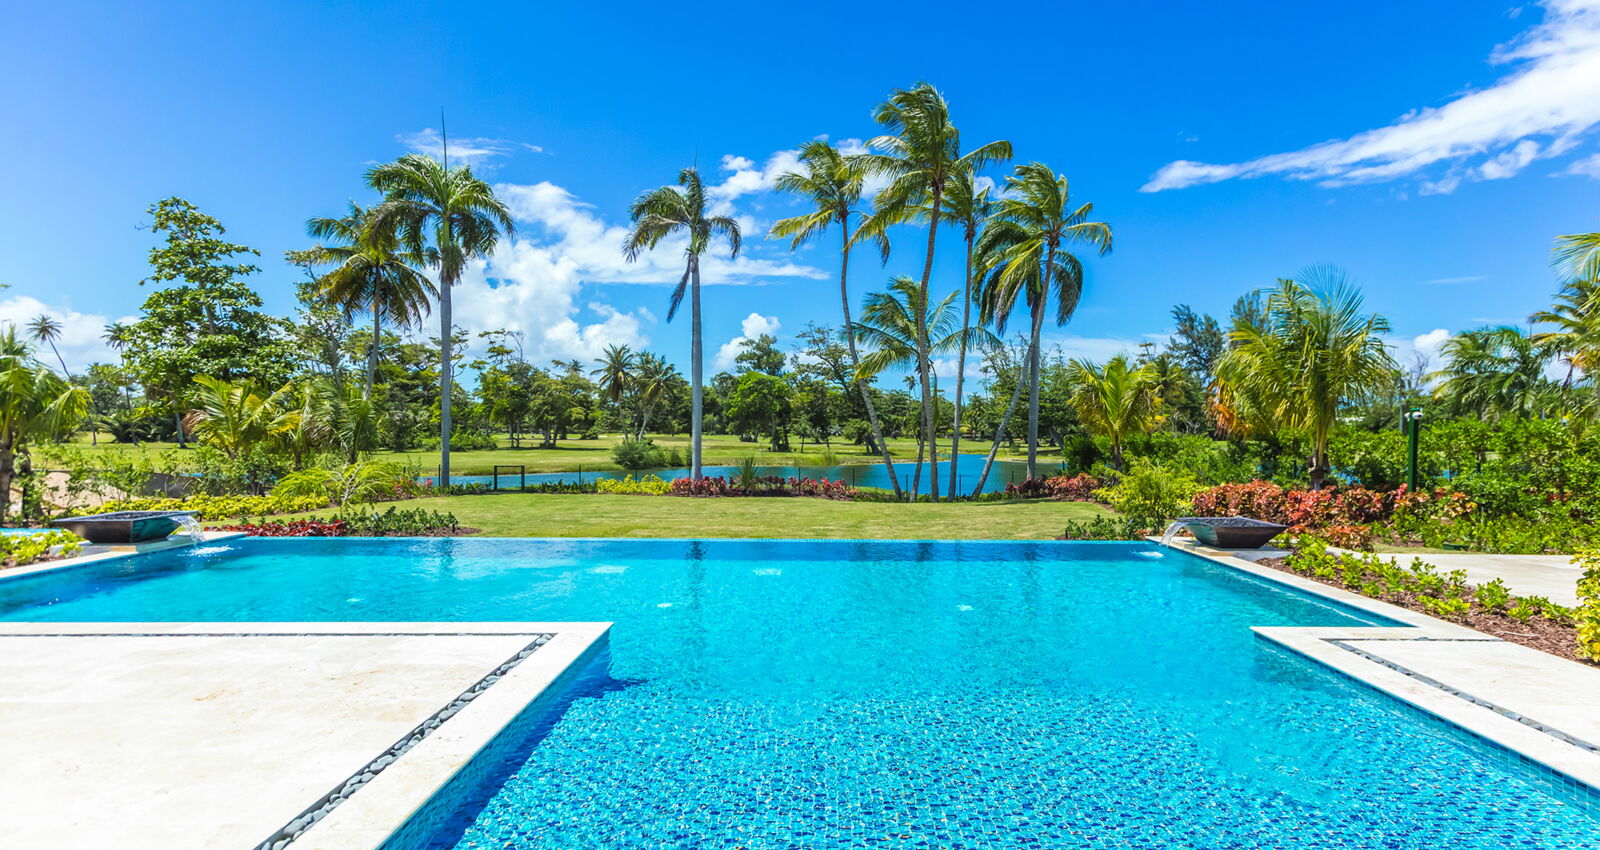 Ritz-Carlton Reserve East Beach Residence estate pool overlooking waterfront and golf course